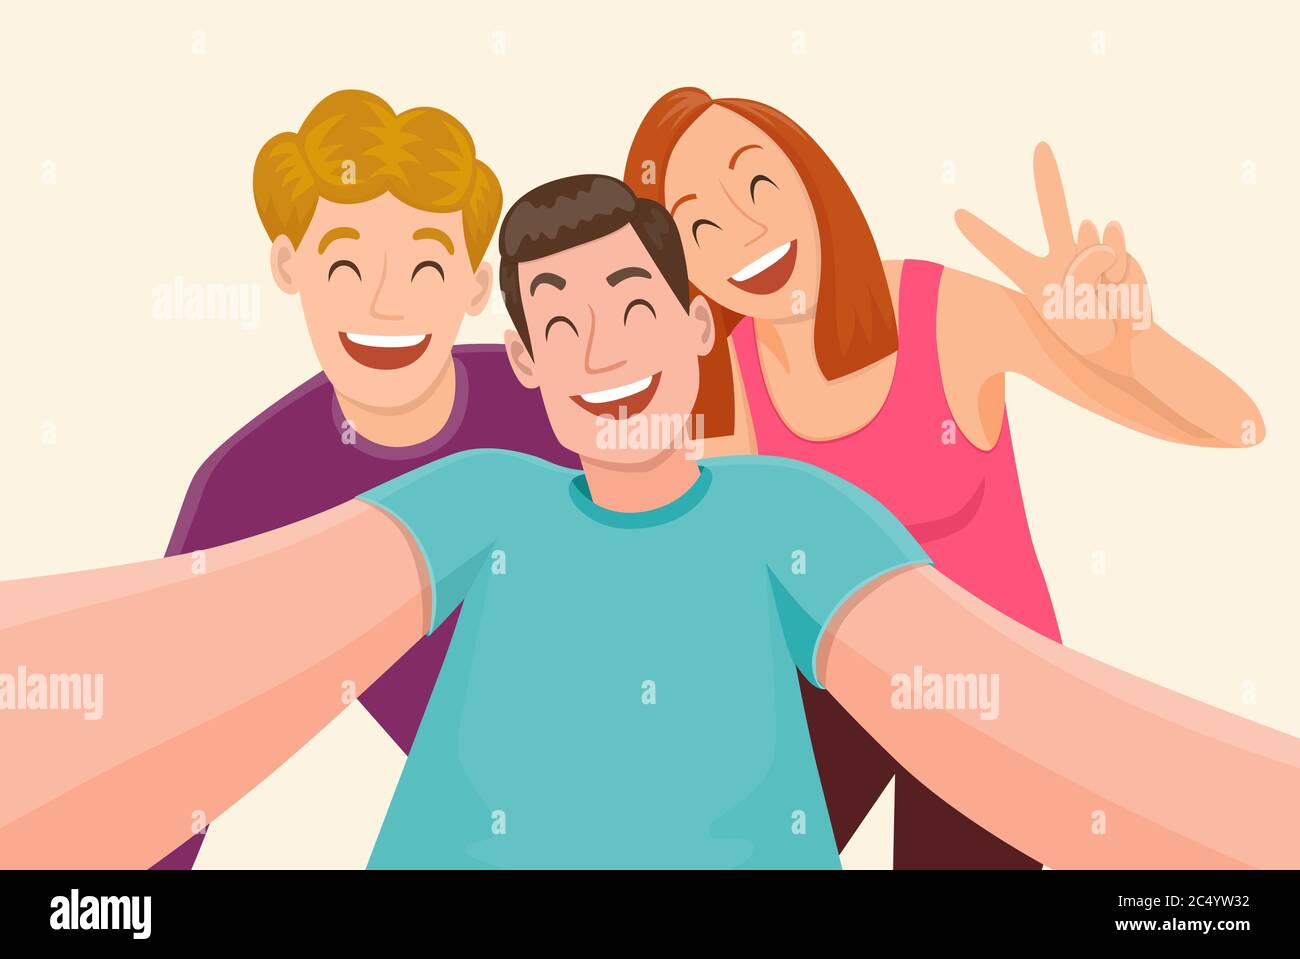 Group of three friends taking a selfie and laughing. Friendship and youth concept. Vector illustration. Stock Vector